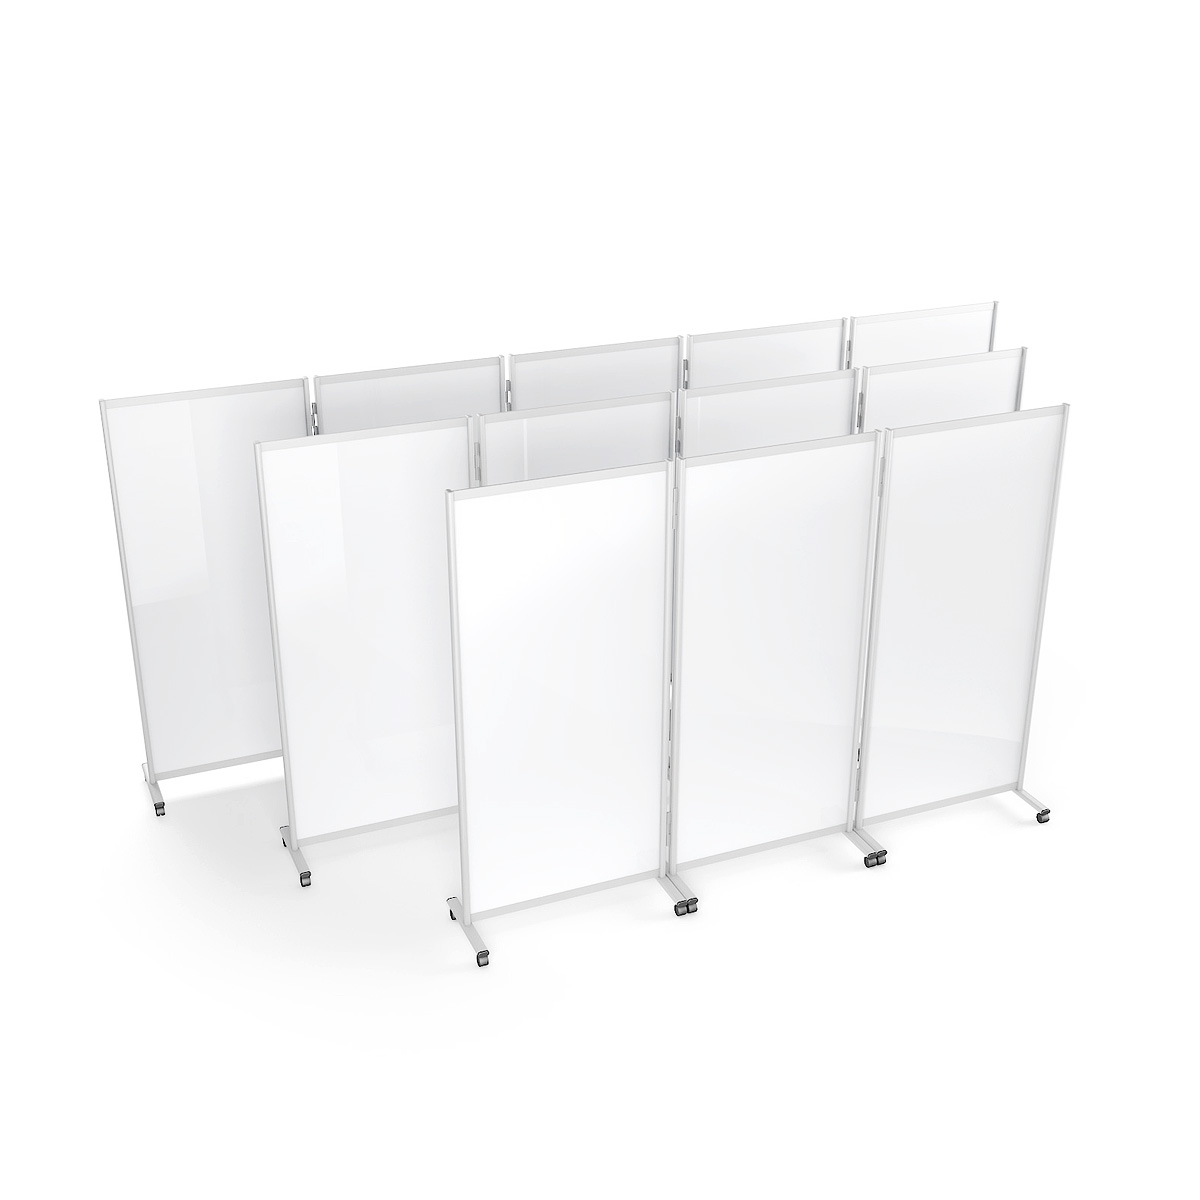 White Privacy Room Screens on Wheels Can be Linked Together to Create a Large Panel Screen For Extra Privacy 